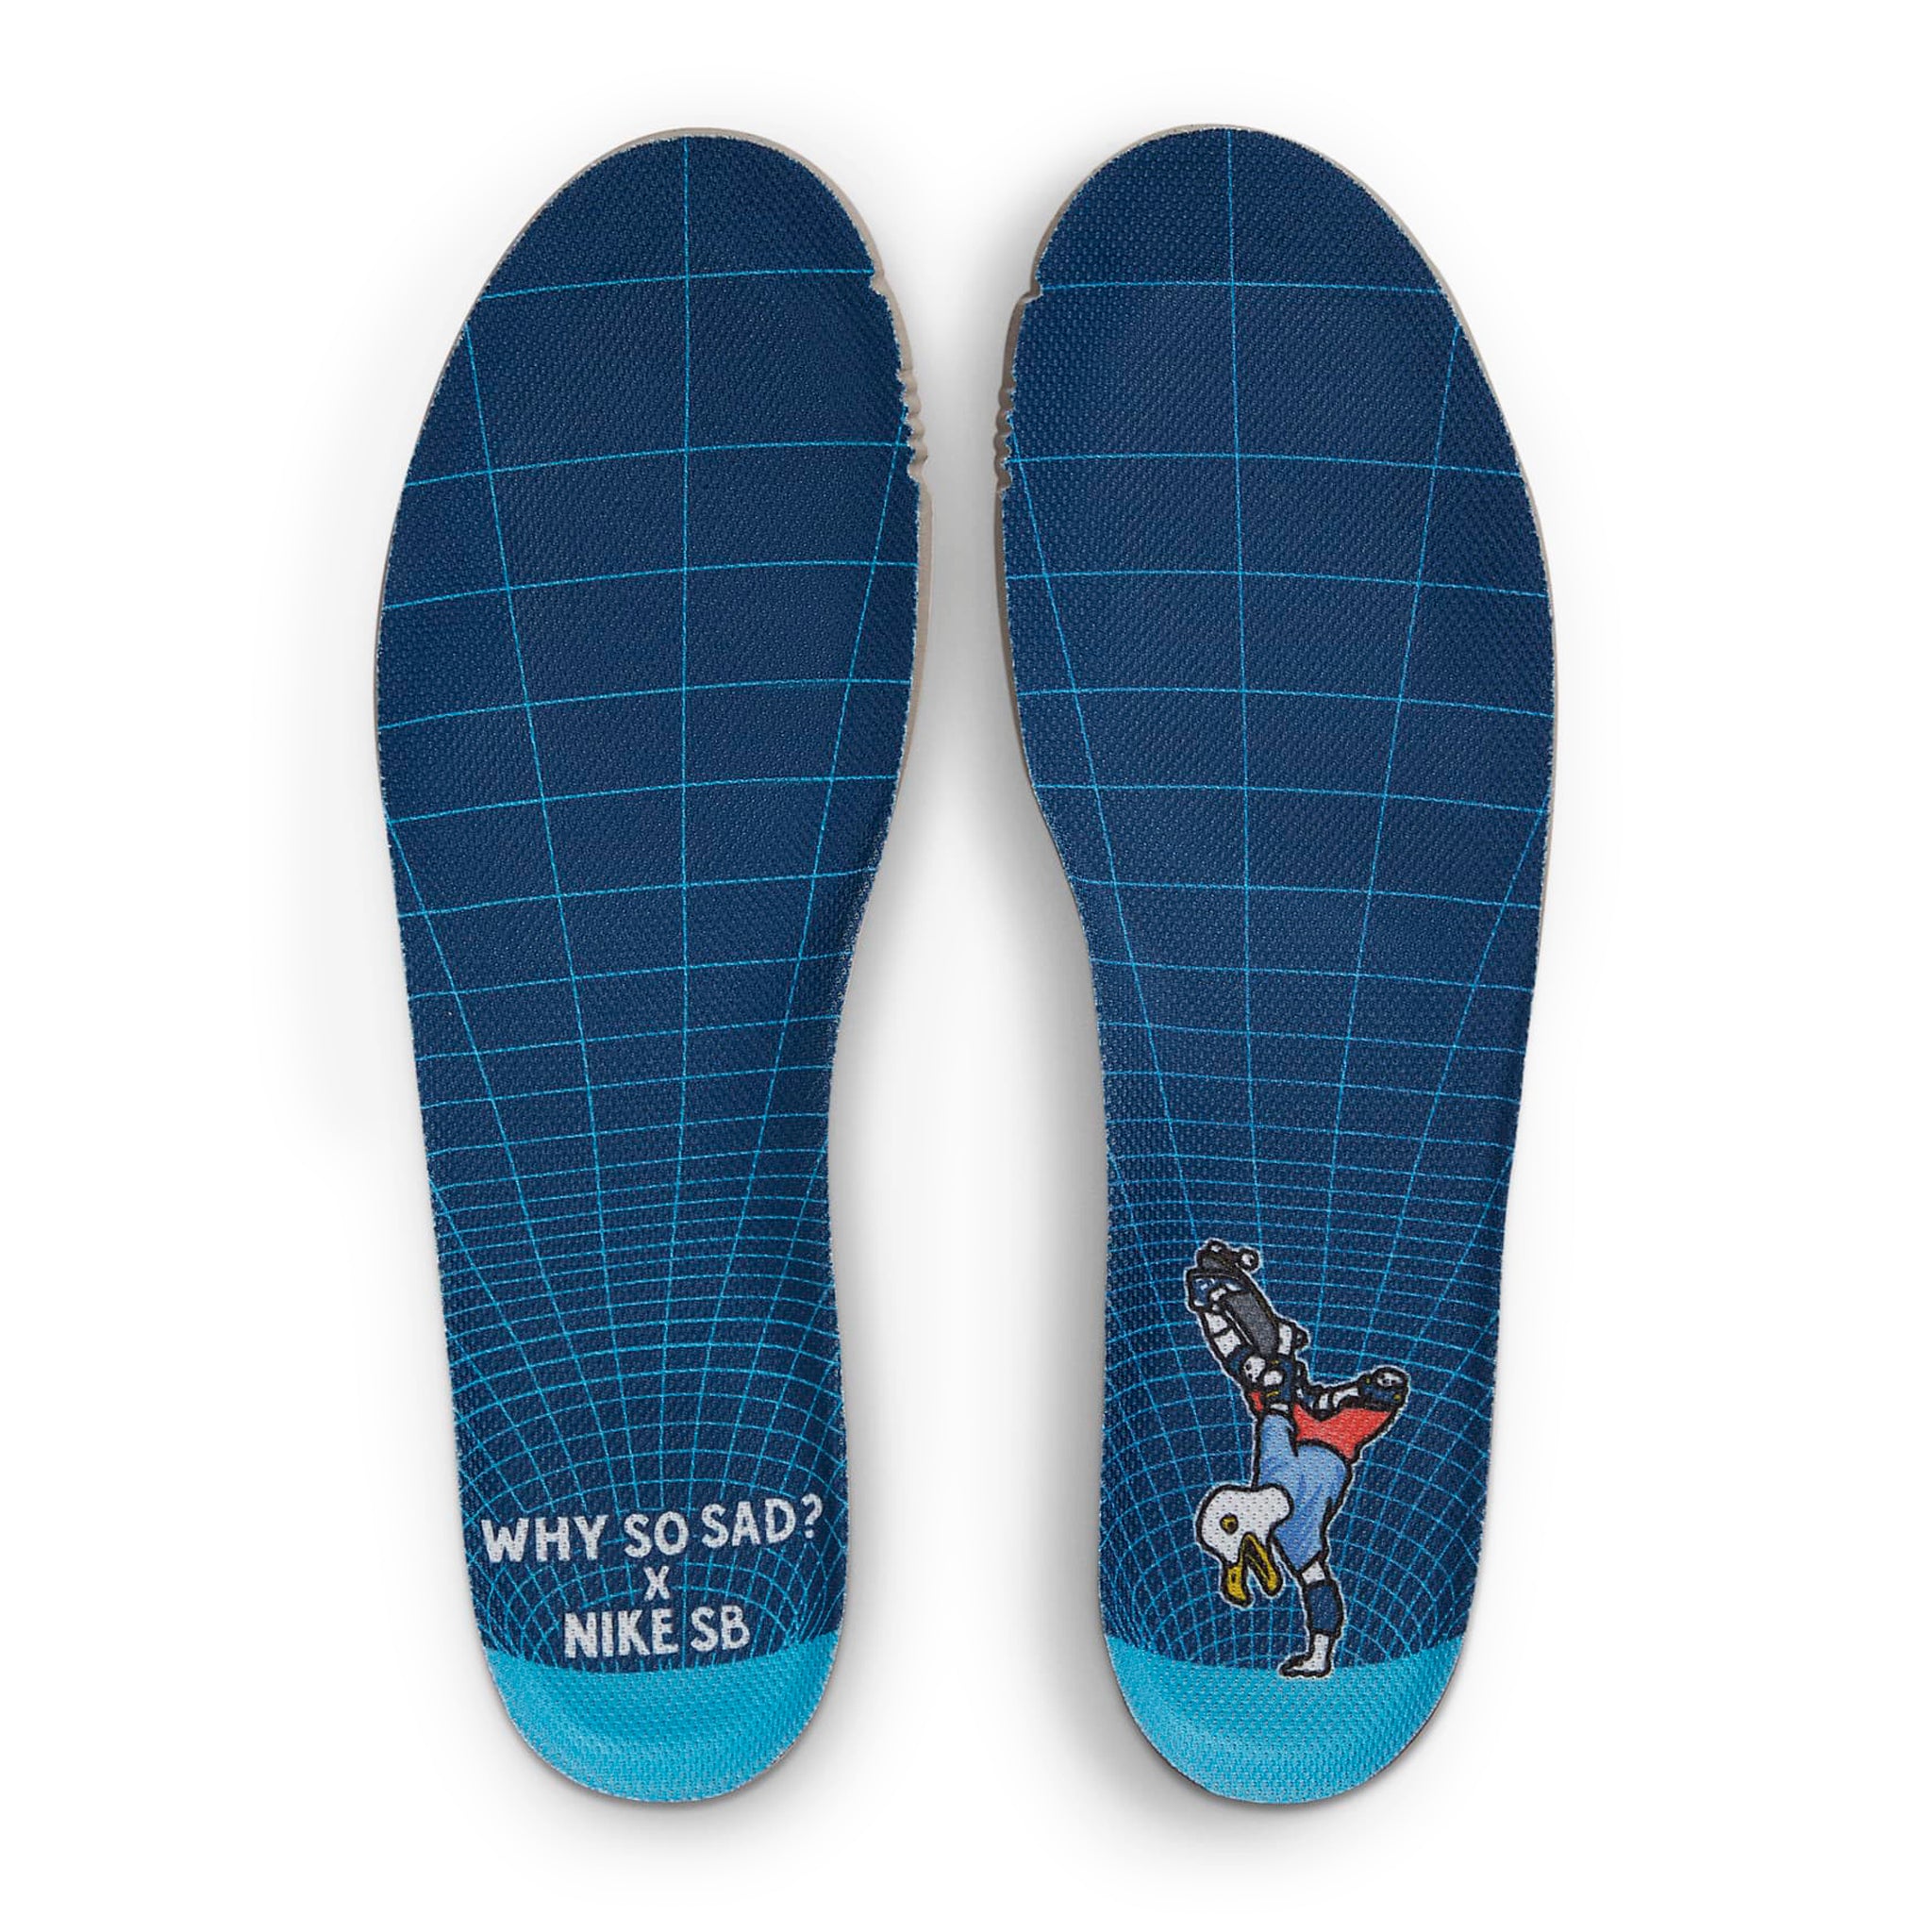 Insole view of Nike SB Dunk Low Pro Why So Sad? DX5549-400